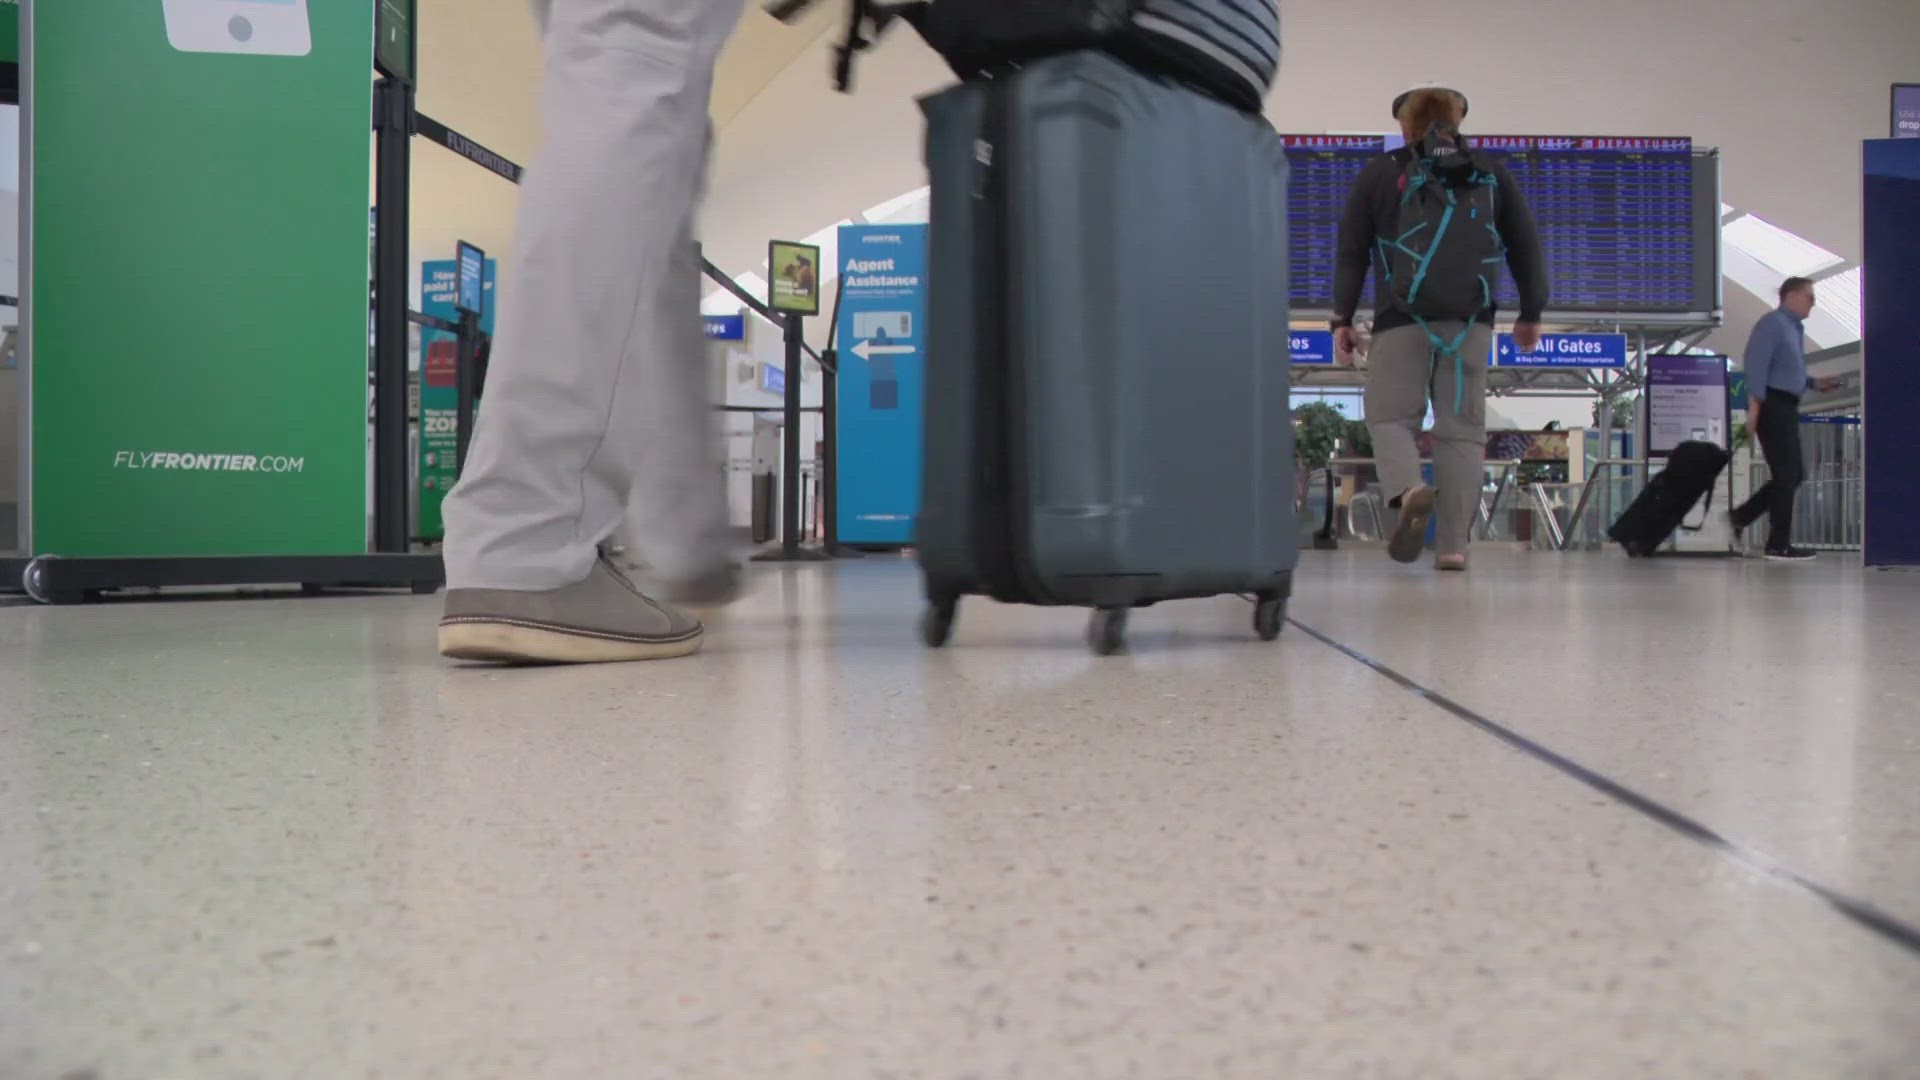 Millions are expected to drive or fly for Memorial Day weekend. Here's Lambert's plan to improve travel experience by making its airport better to get around in.